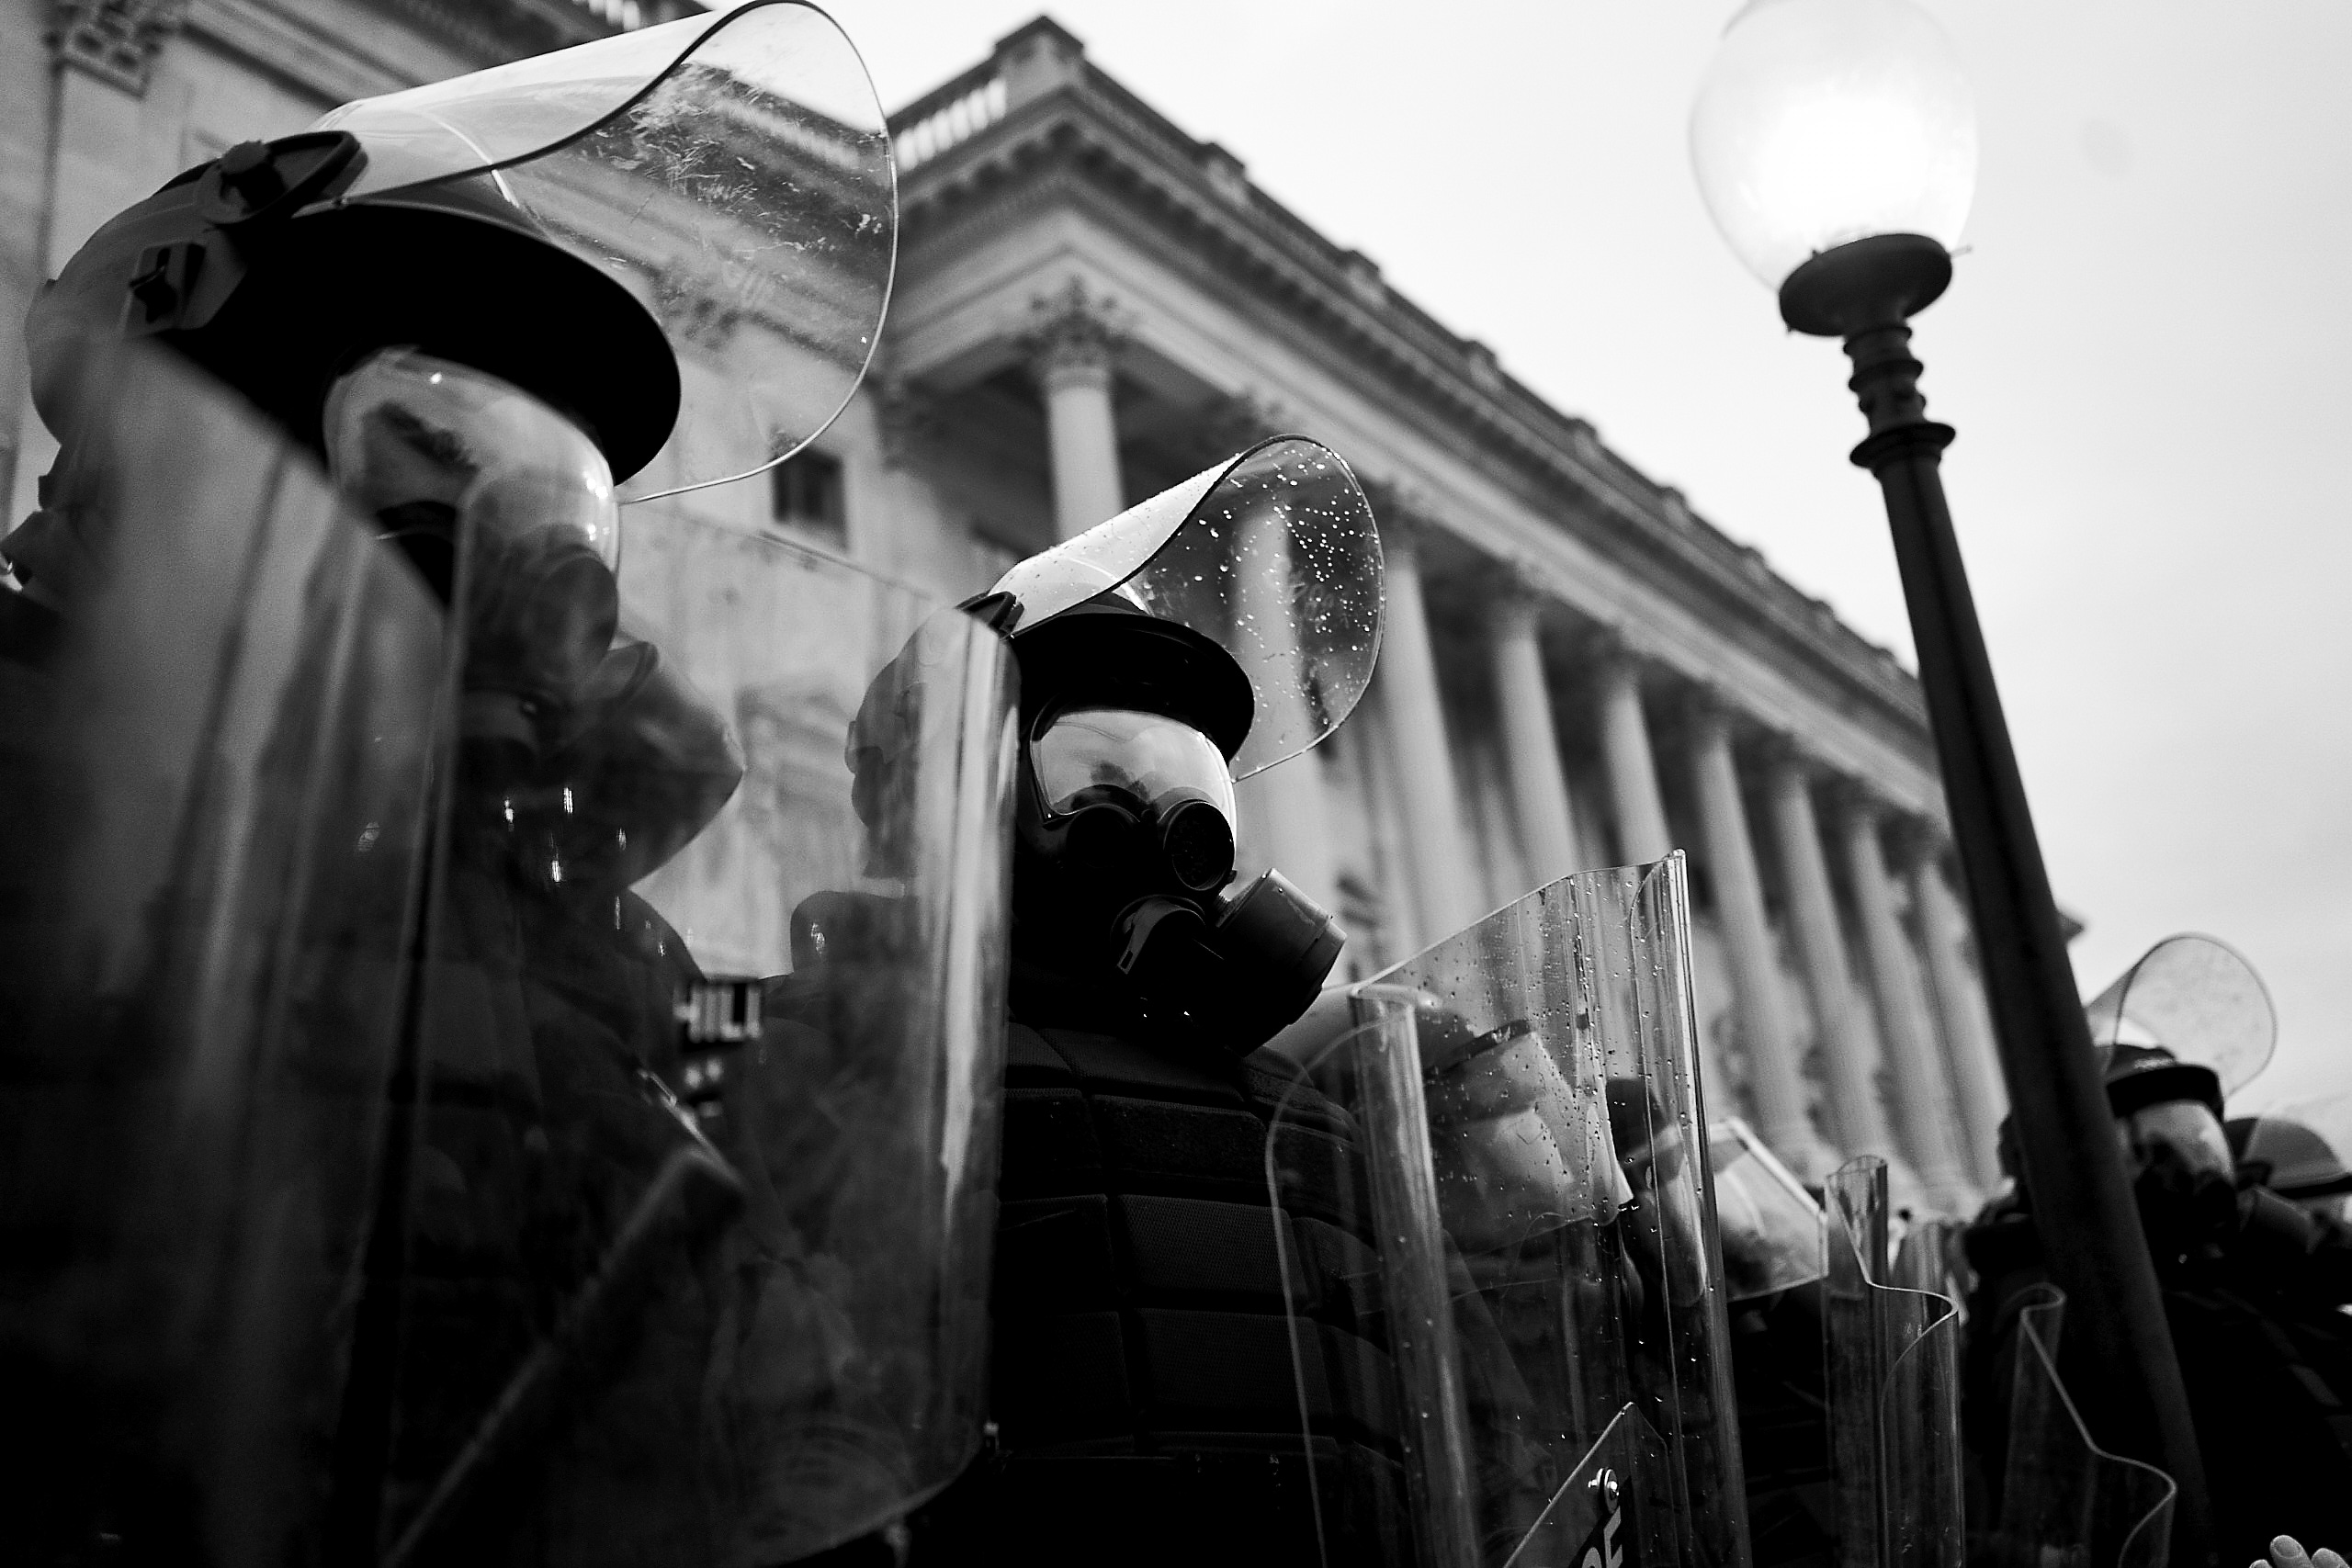 210106-2_DC_Protests_Insurrection_SWP_1915